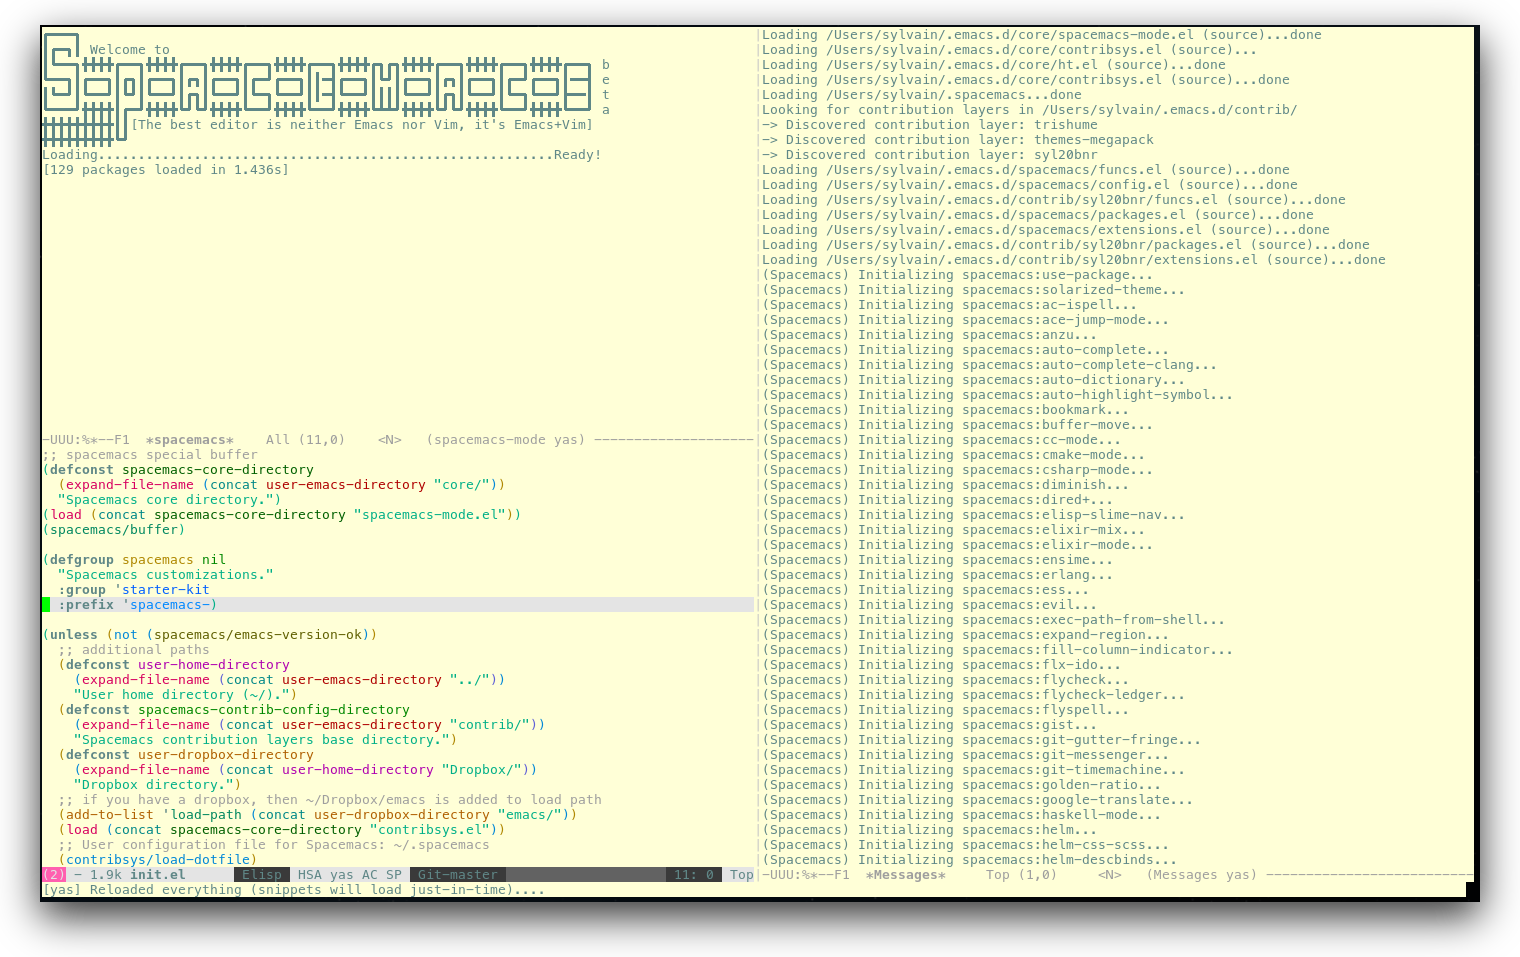 /TakeV/spacemacs/media/commit/5b94e3ab8ade2b50cf25a08251ae3228328e879a/doc/img/spacemacs-urxvt.png